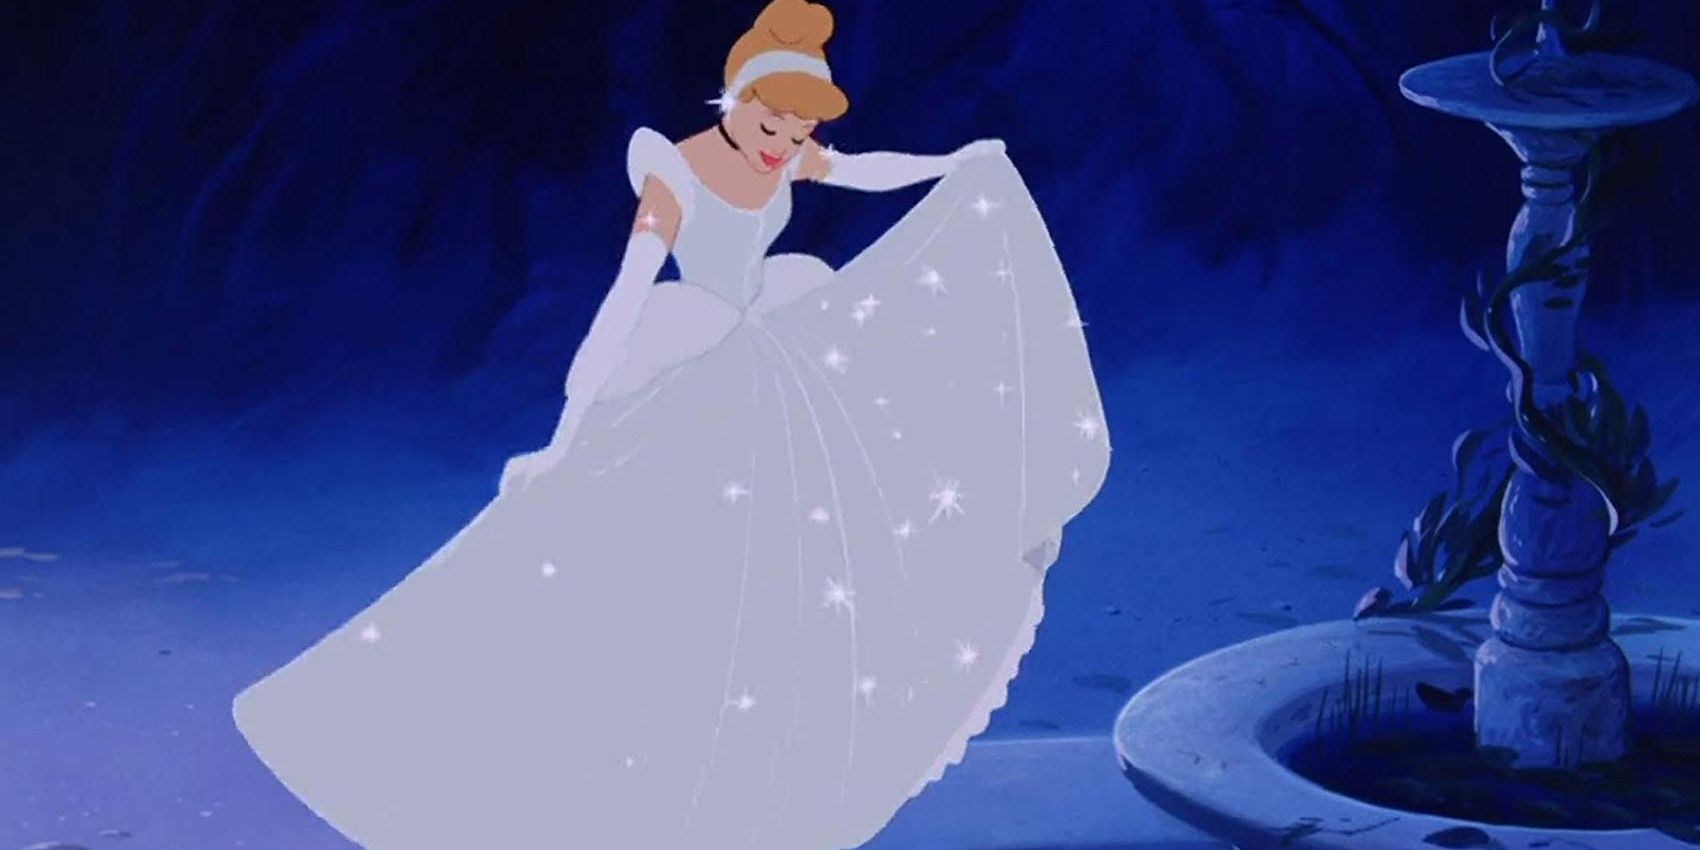 The definitive version of Cinderella, 1950, where she looks at her glittering white dress by a fountain